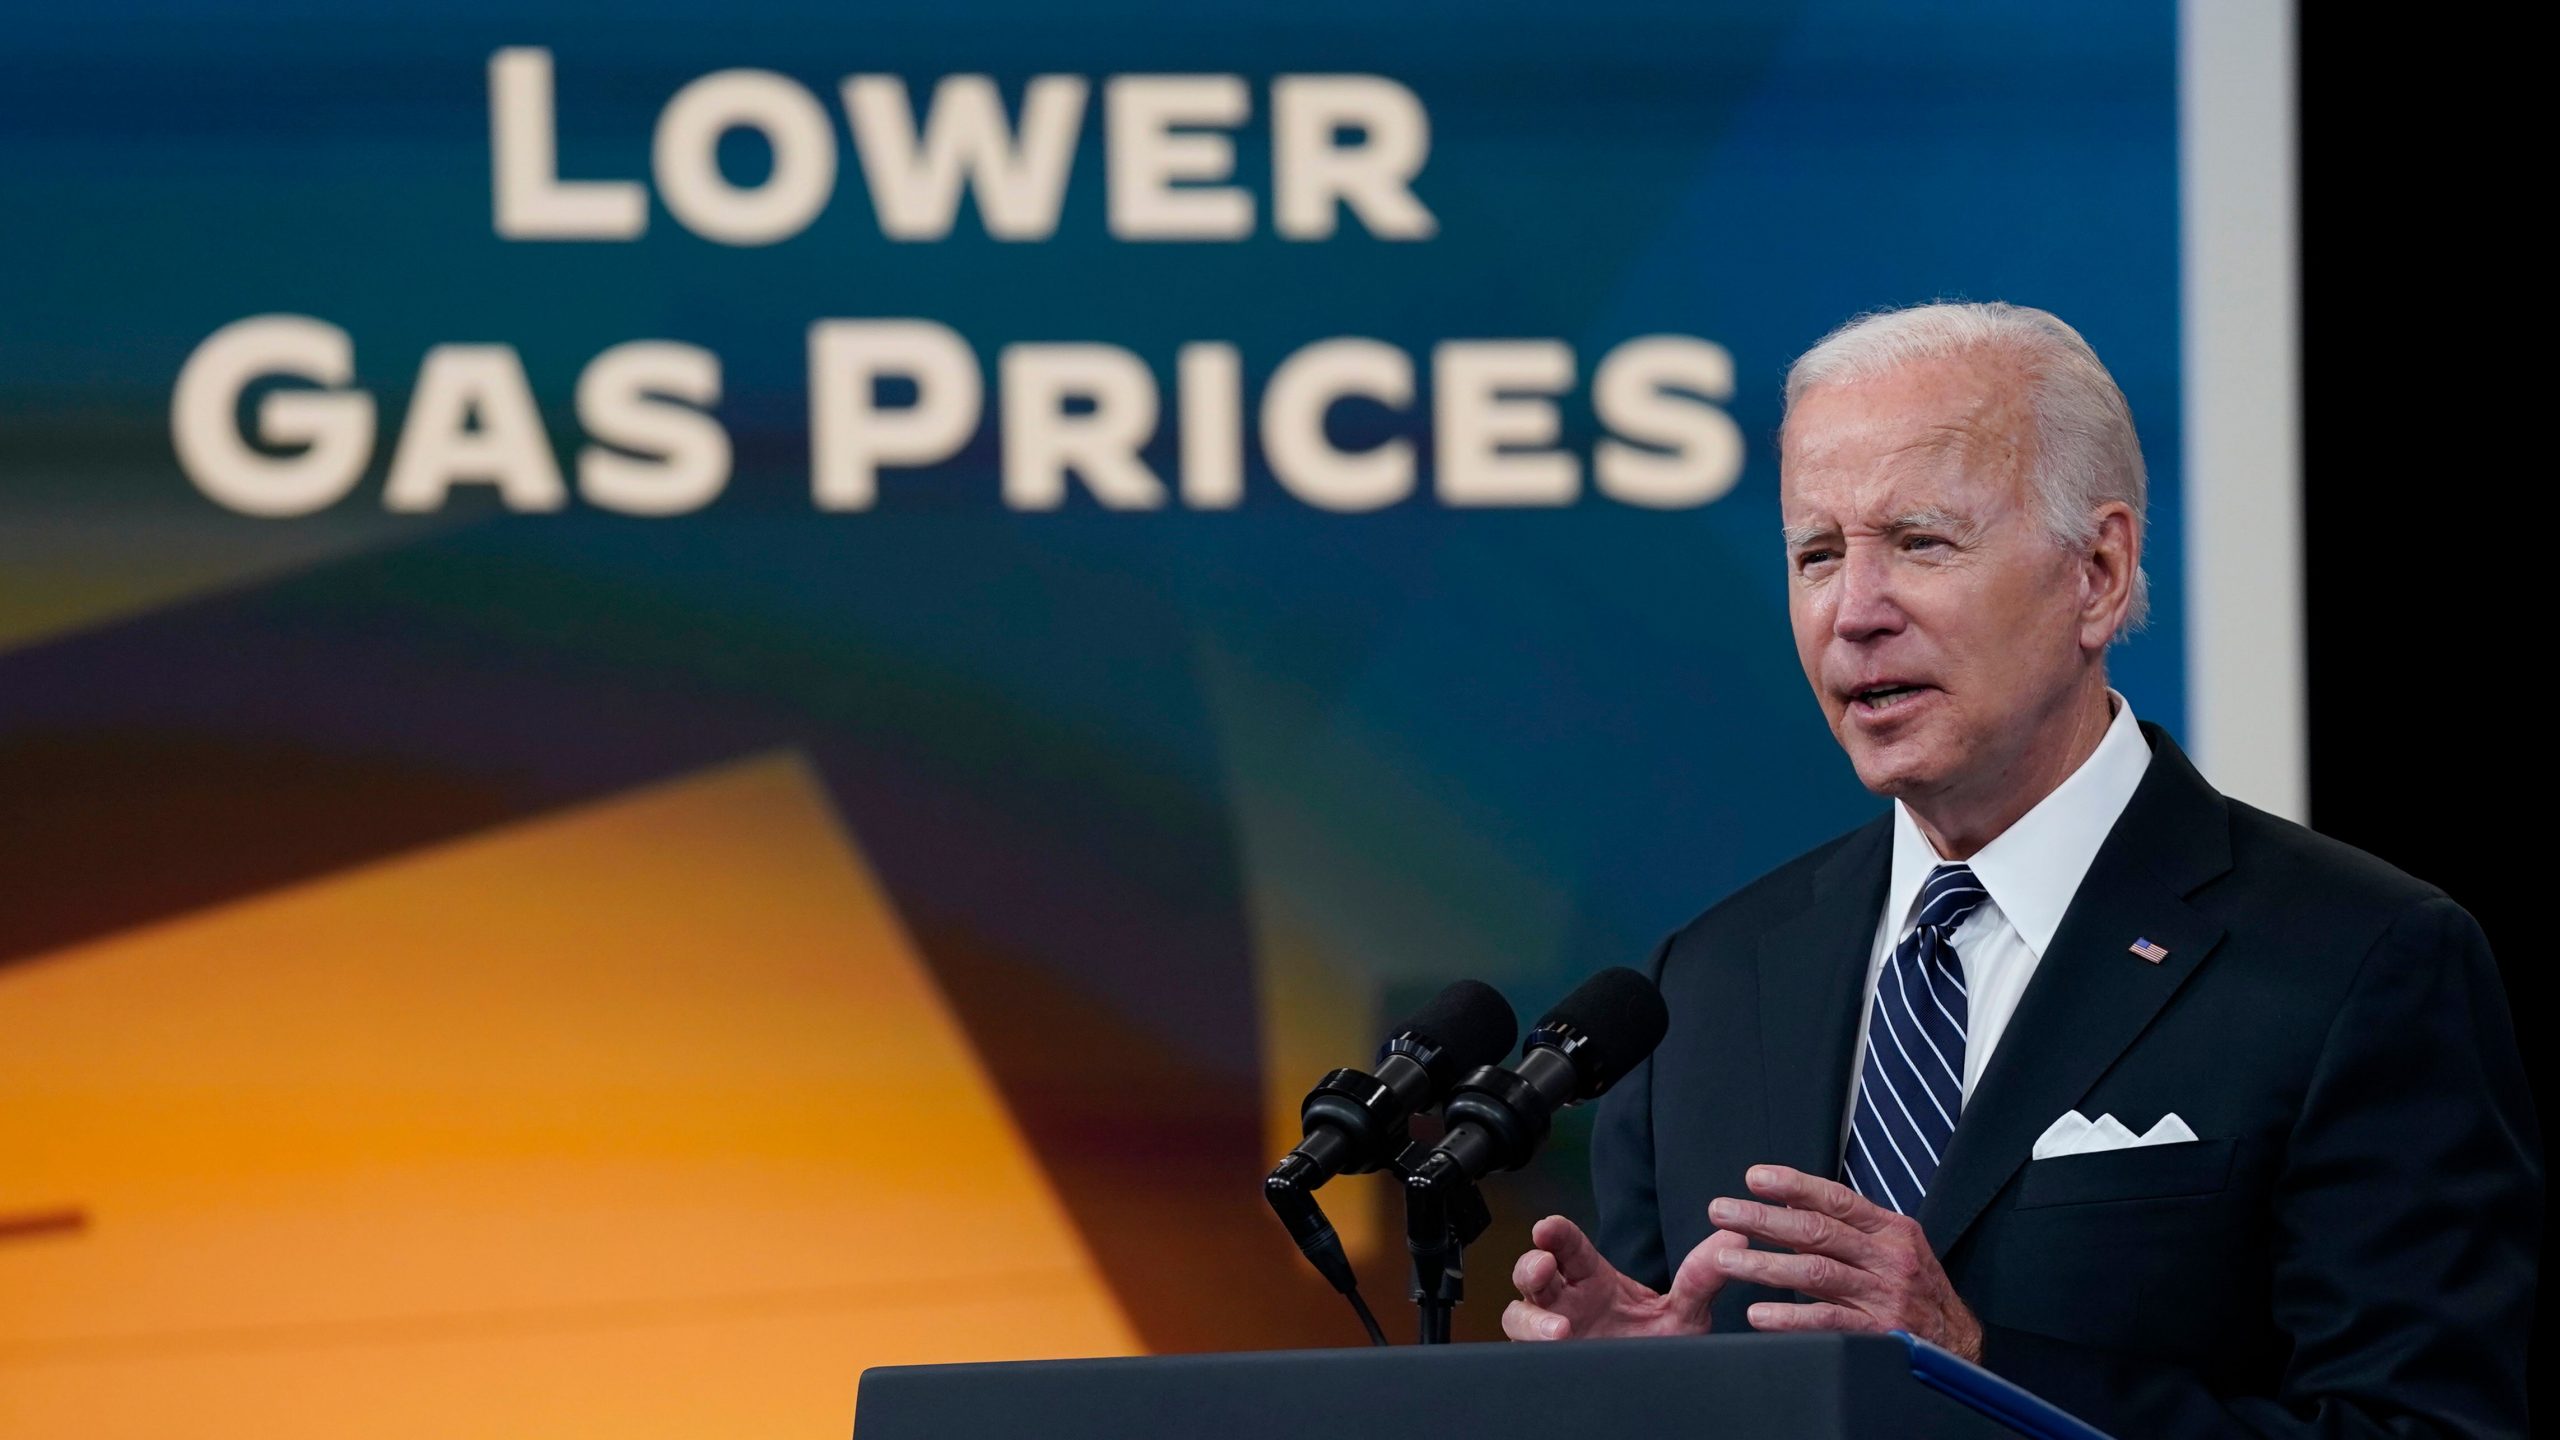 What COVID symptoms Joe Biden is showing after testing positive